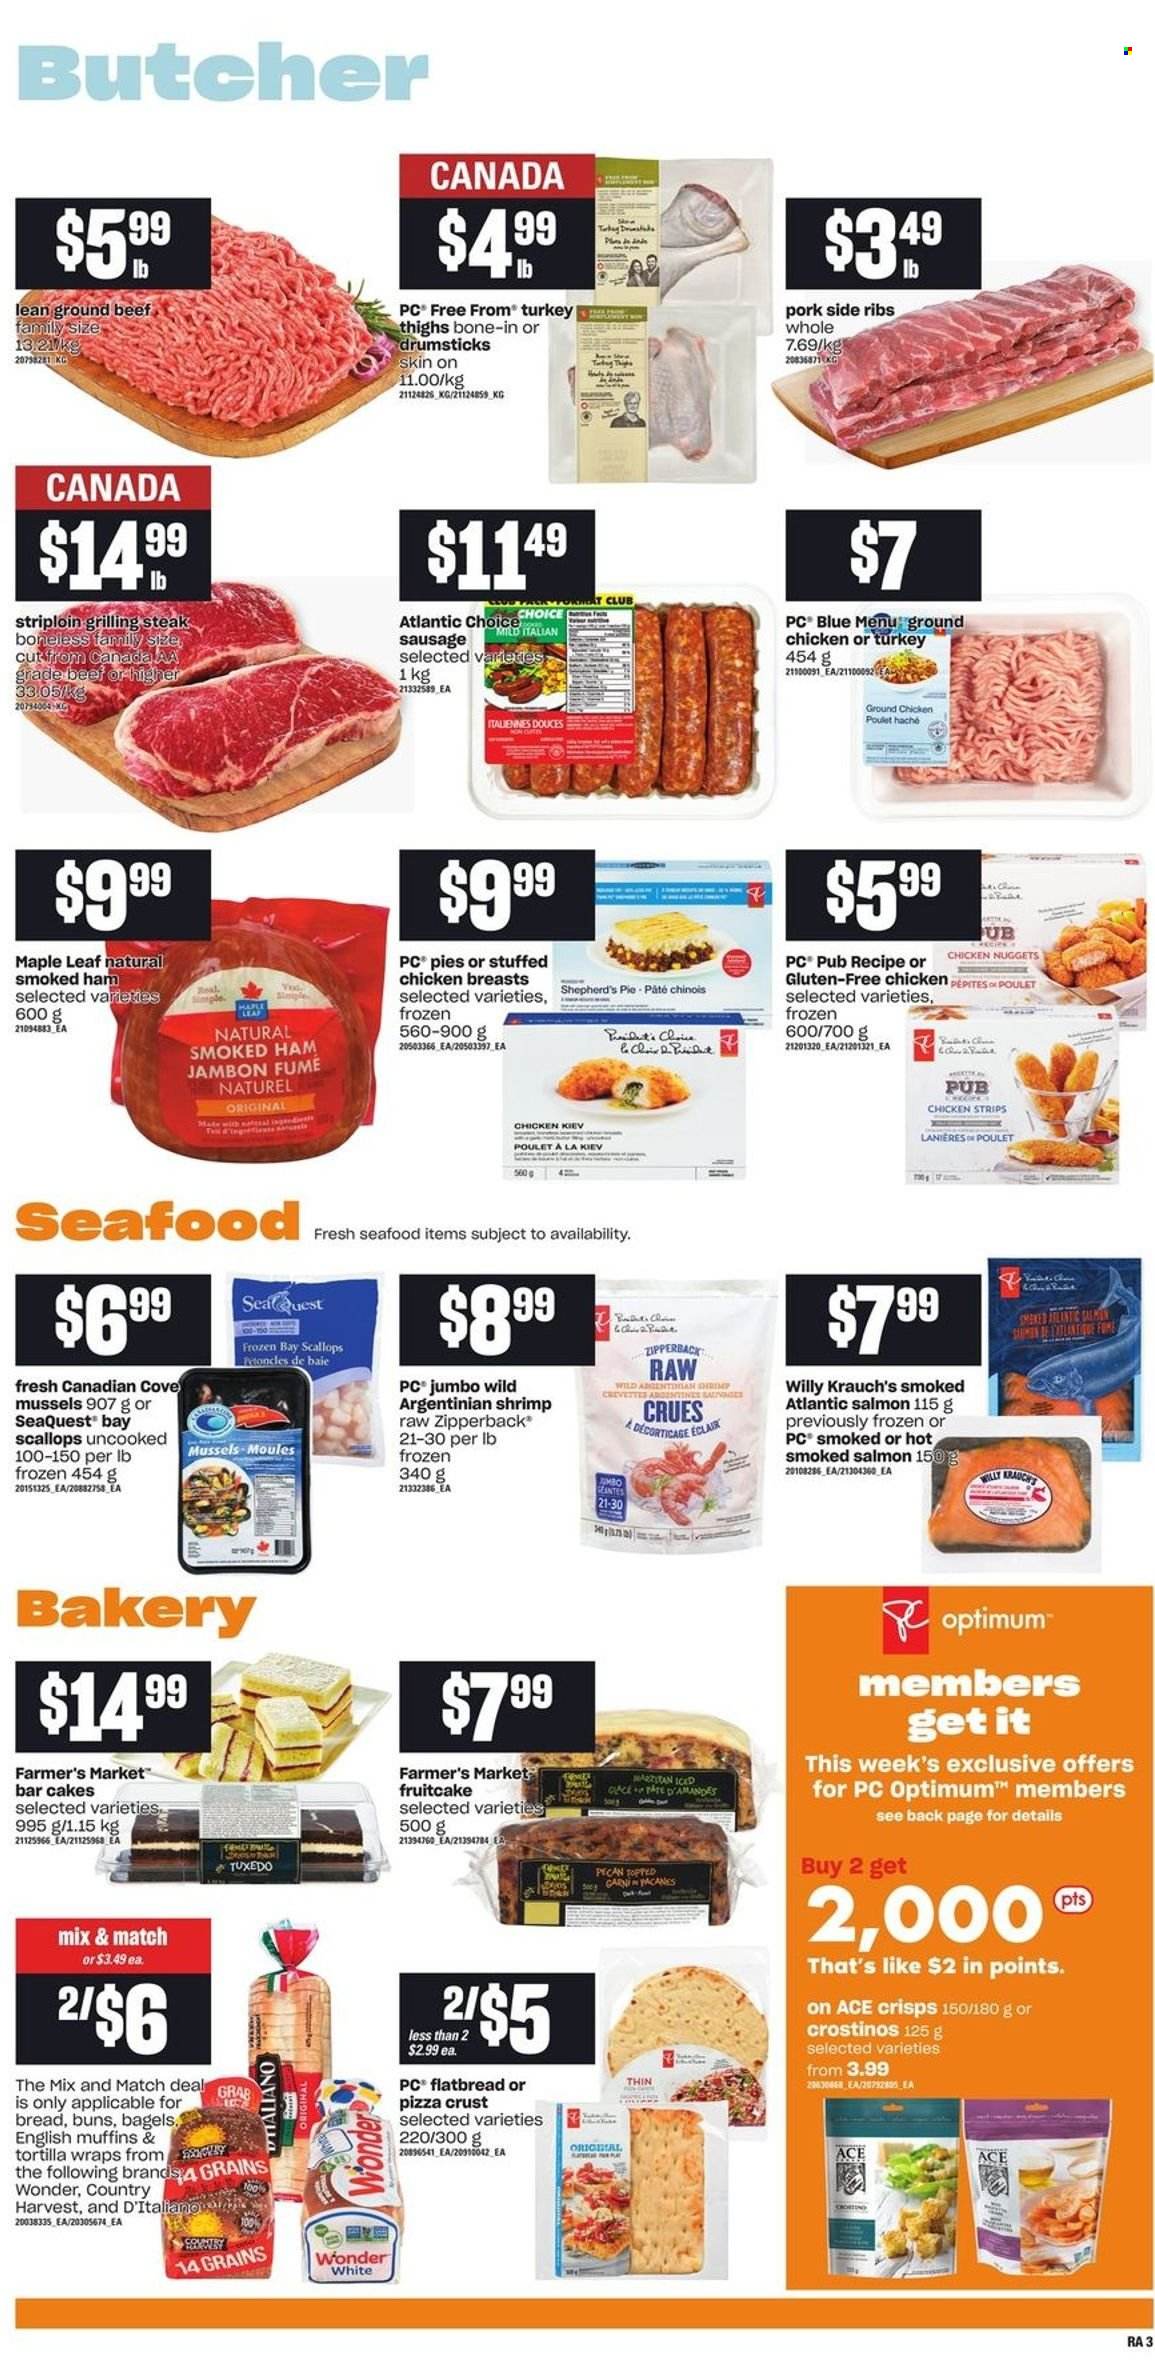 thumbnail - Atlantic Superstore Flyer - November 18, 2021 - November 24, 2021 - Sales products - bagels, english muffins, tortillas, cake, buns, flatbread, wraps, mussels, salmon, scallops, smoked salmon, seafood, shrimps, pizza, nuggets, chicken nuggets, stuffed chicken, ham, smoked ham, sausage, Country Harvest, strips, chicken strips, Chicken Kiev, ground chicken, chicken, turkey, turkey thigh, beef meat, ground beef, Optimum, steak. Page 5.